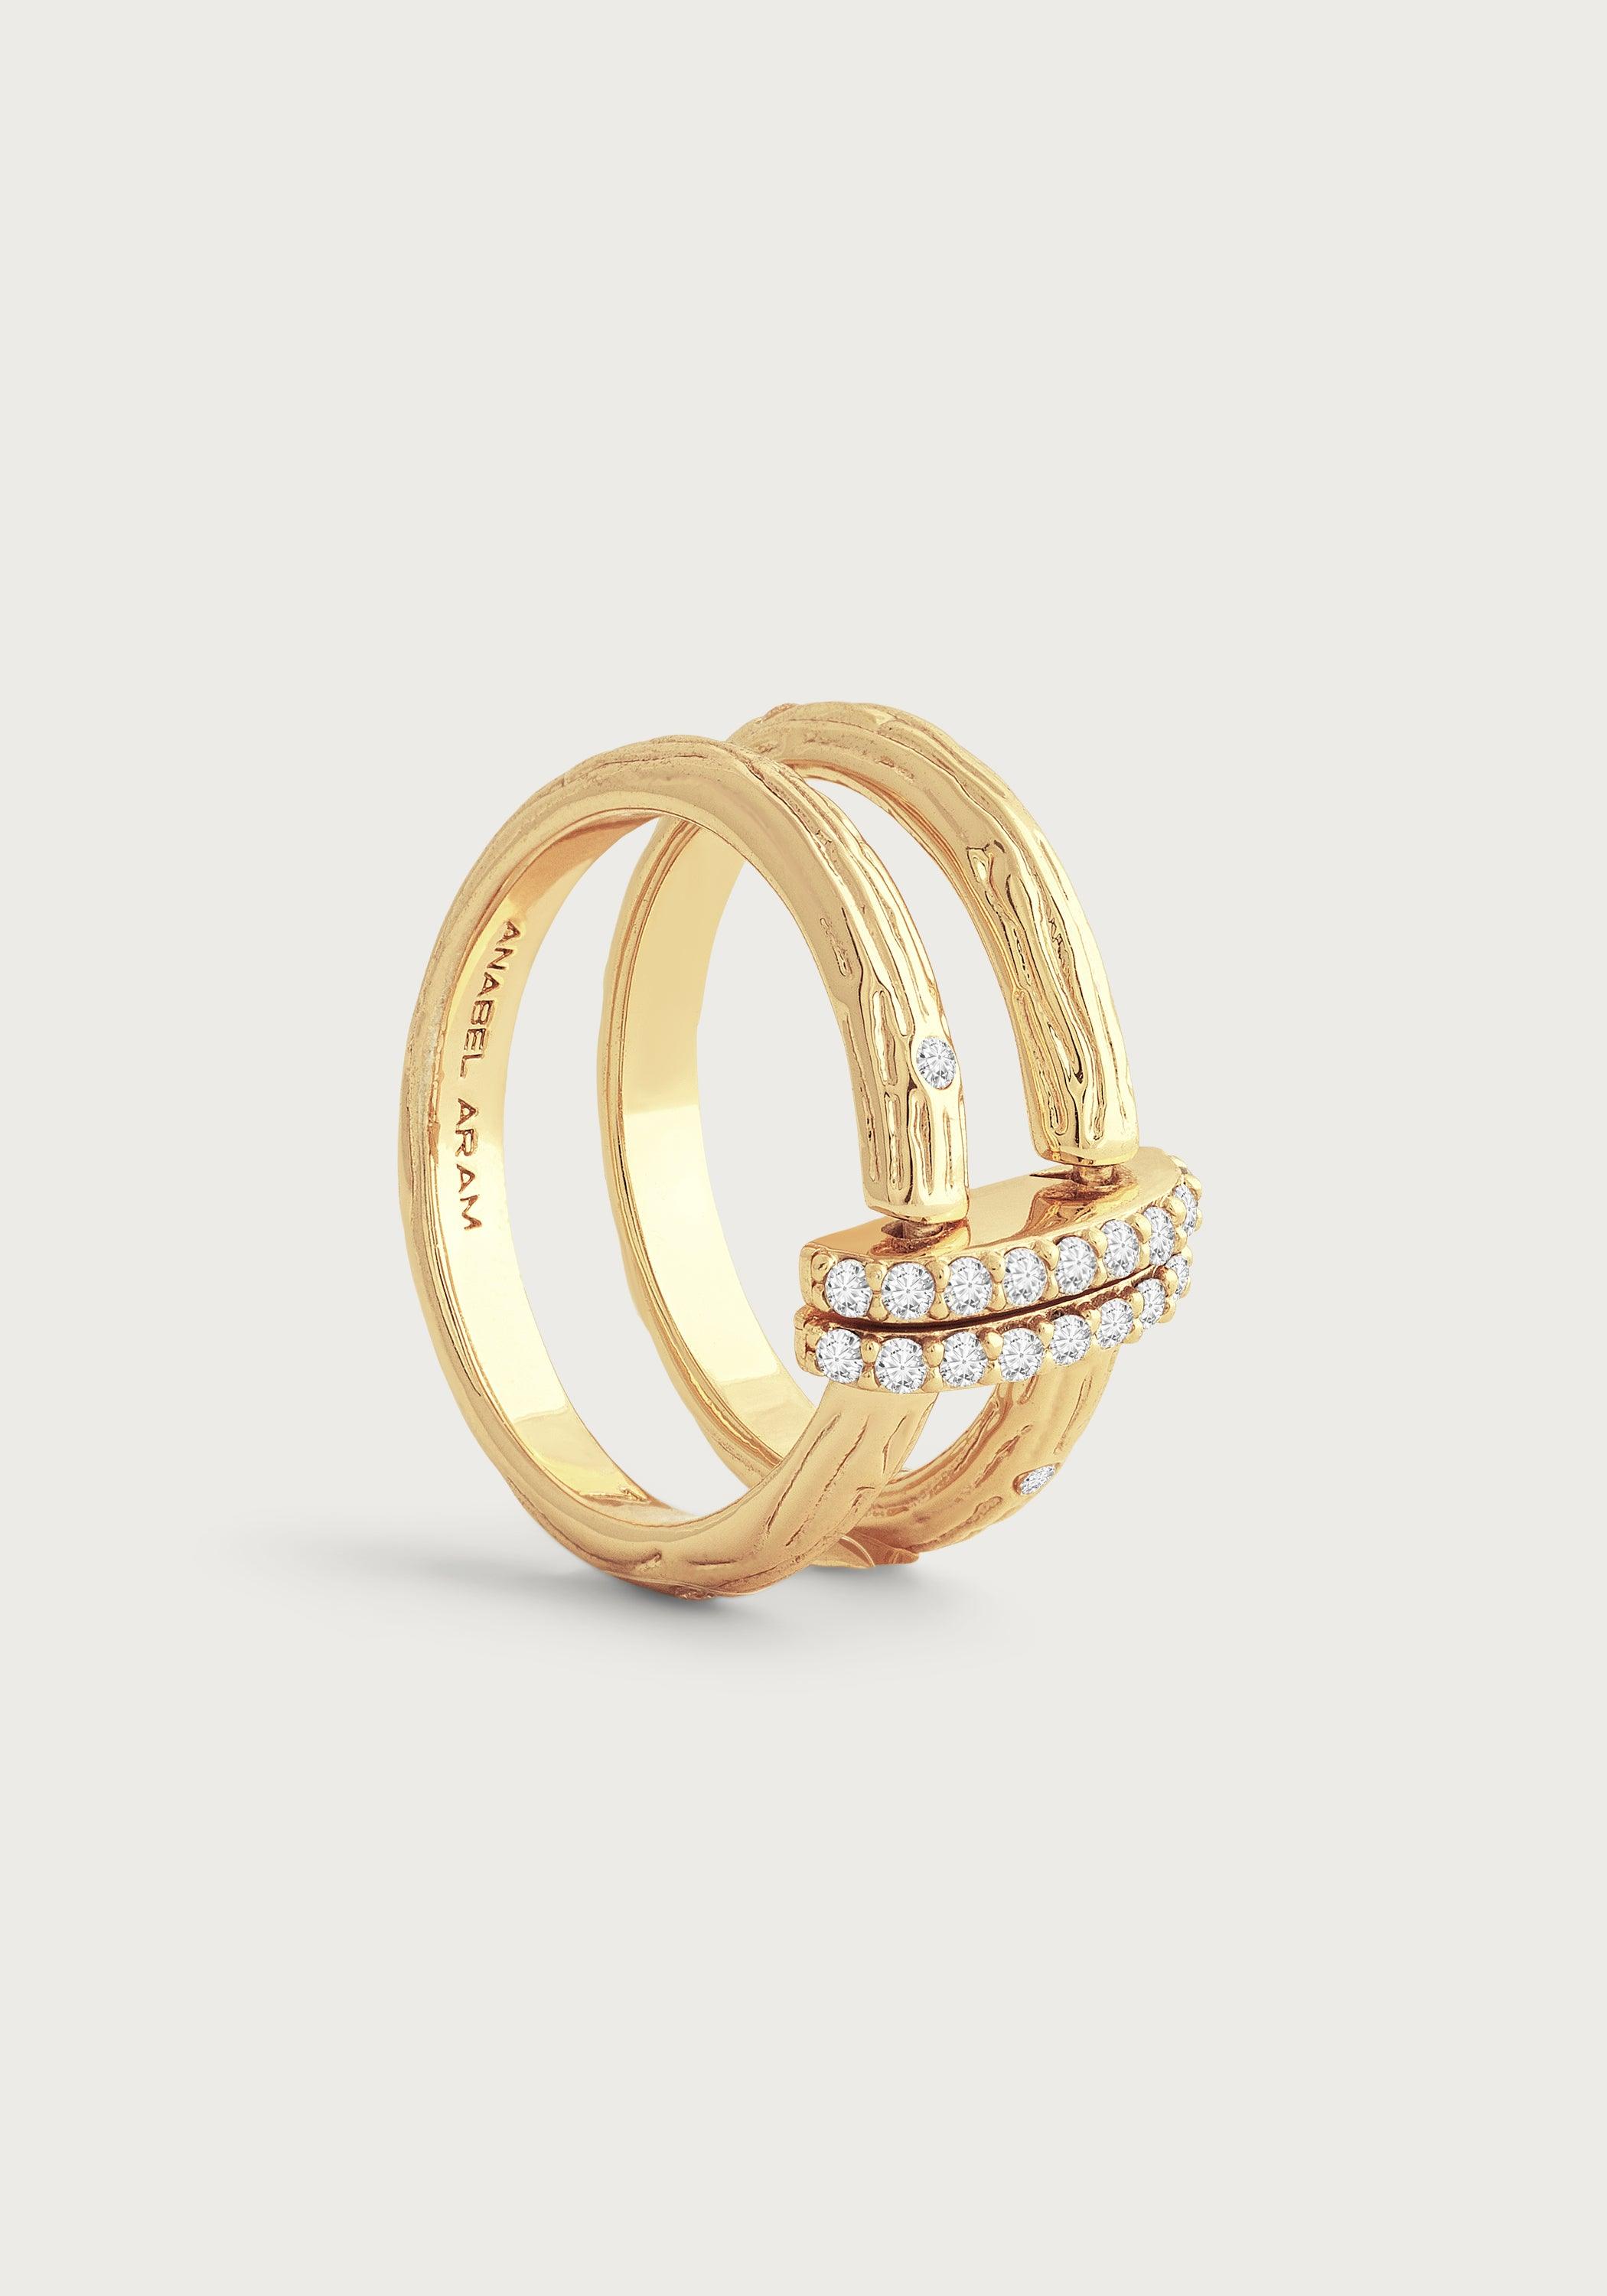 Enchanted Forest Chain Double Ring - Anabel Aram